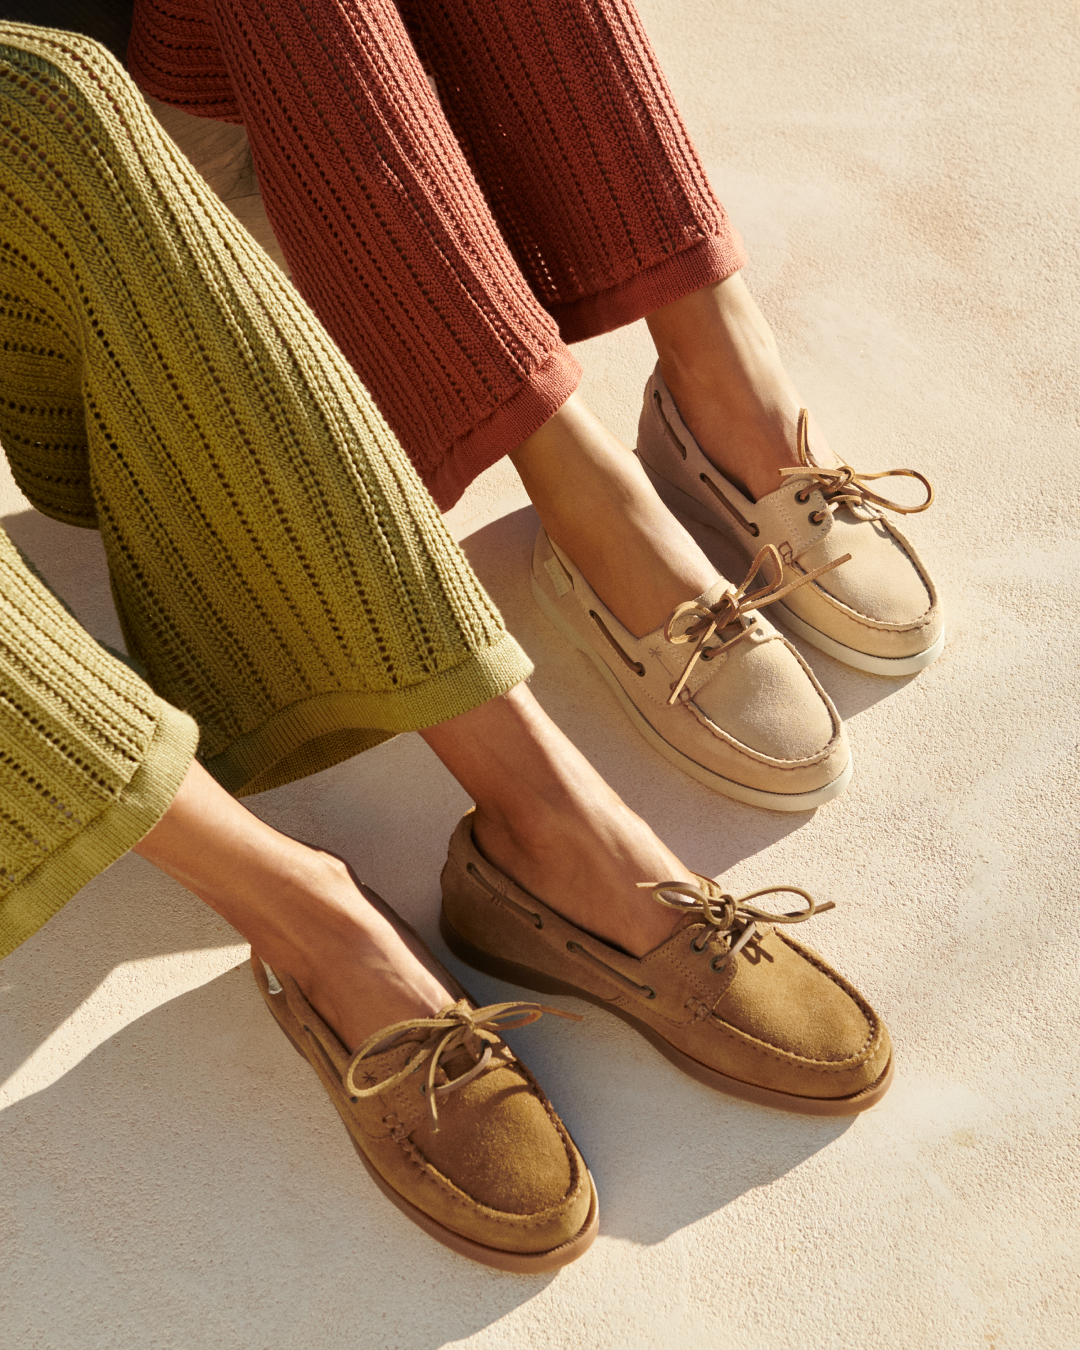 BOAT SHOES FOR EVERYONE